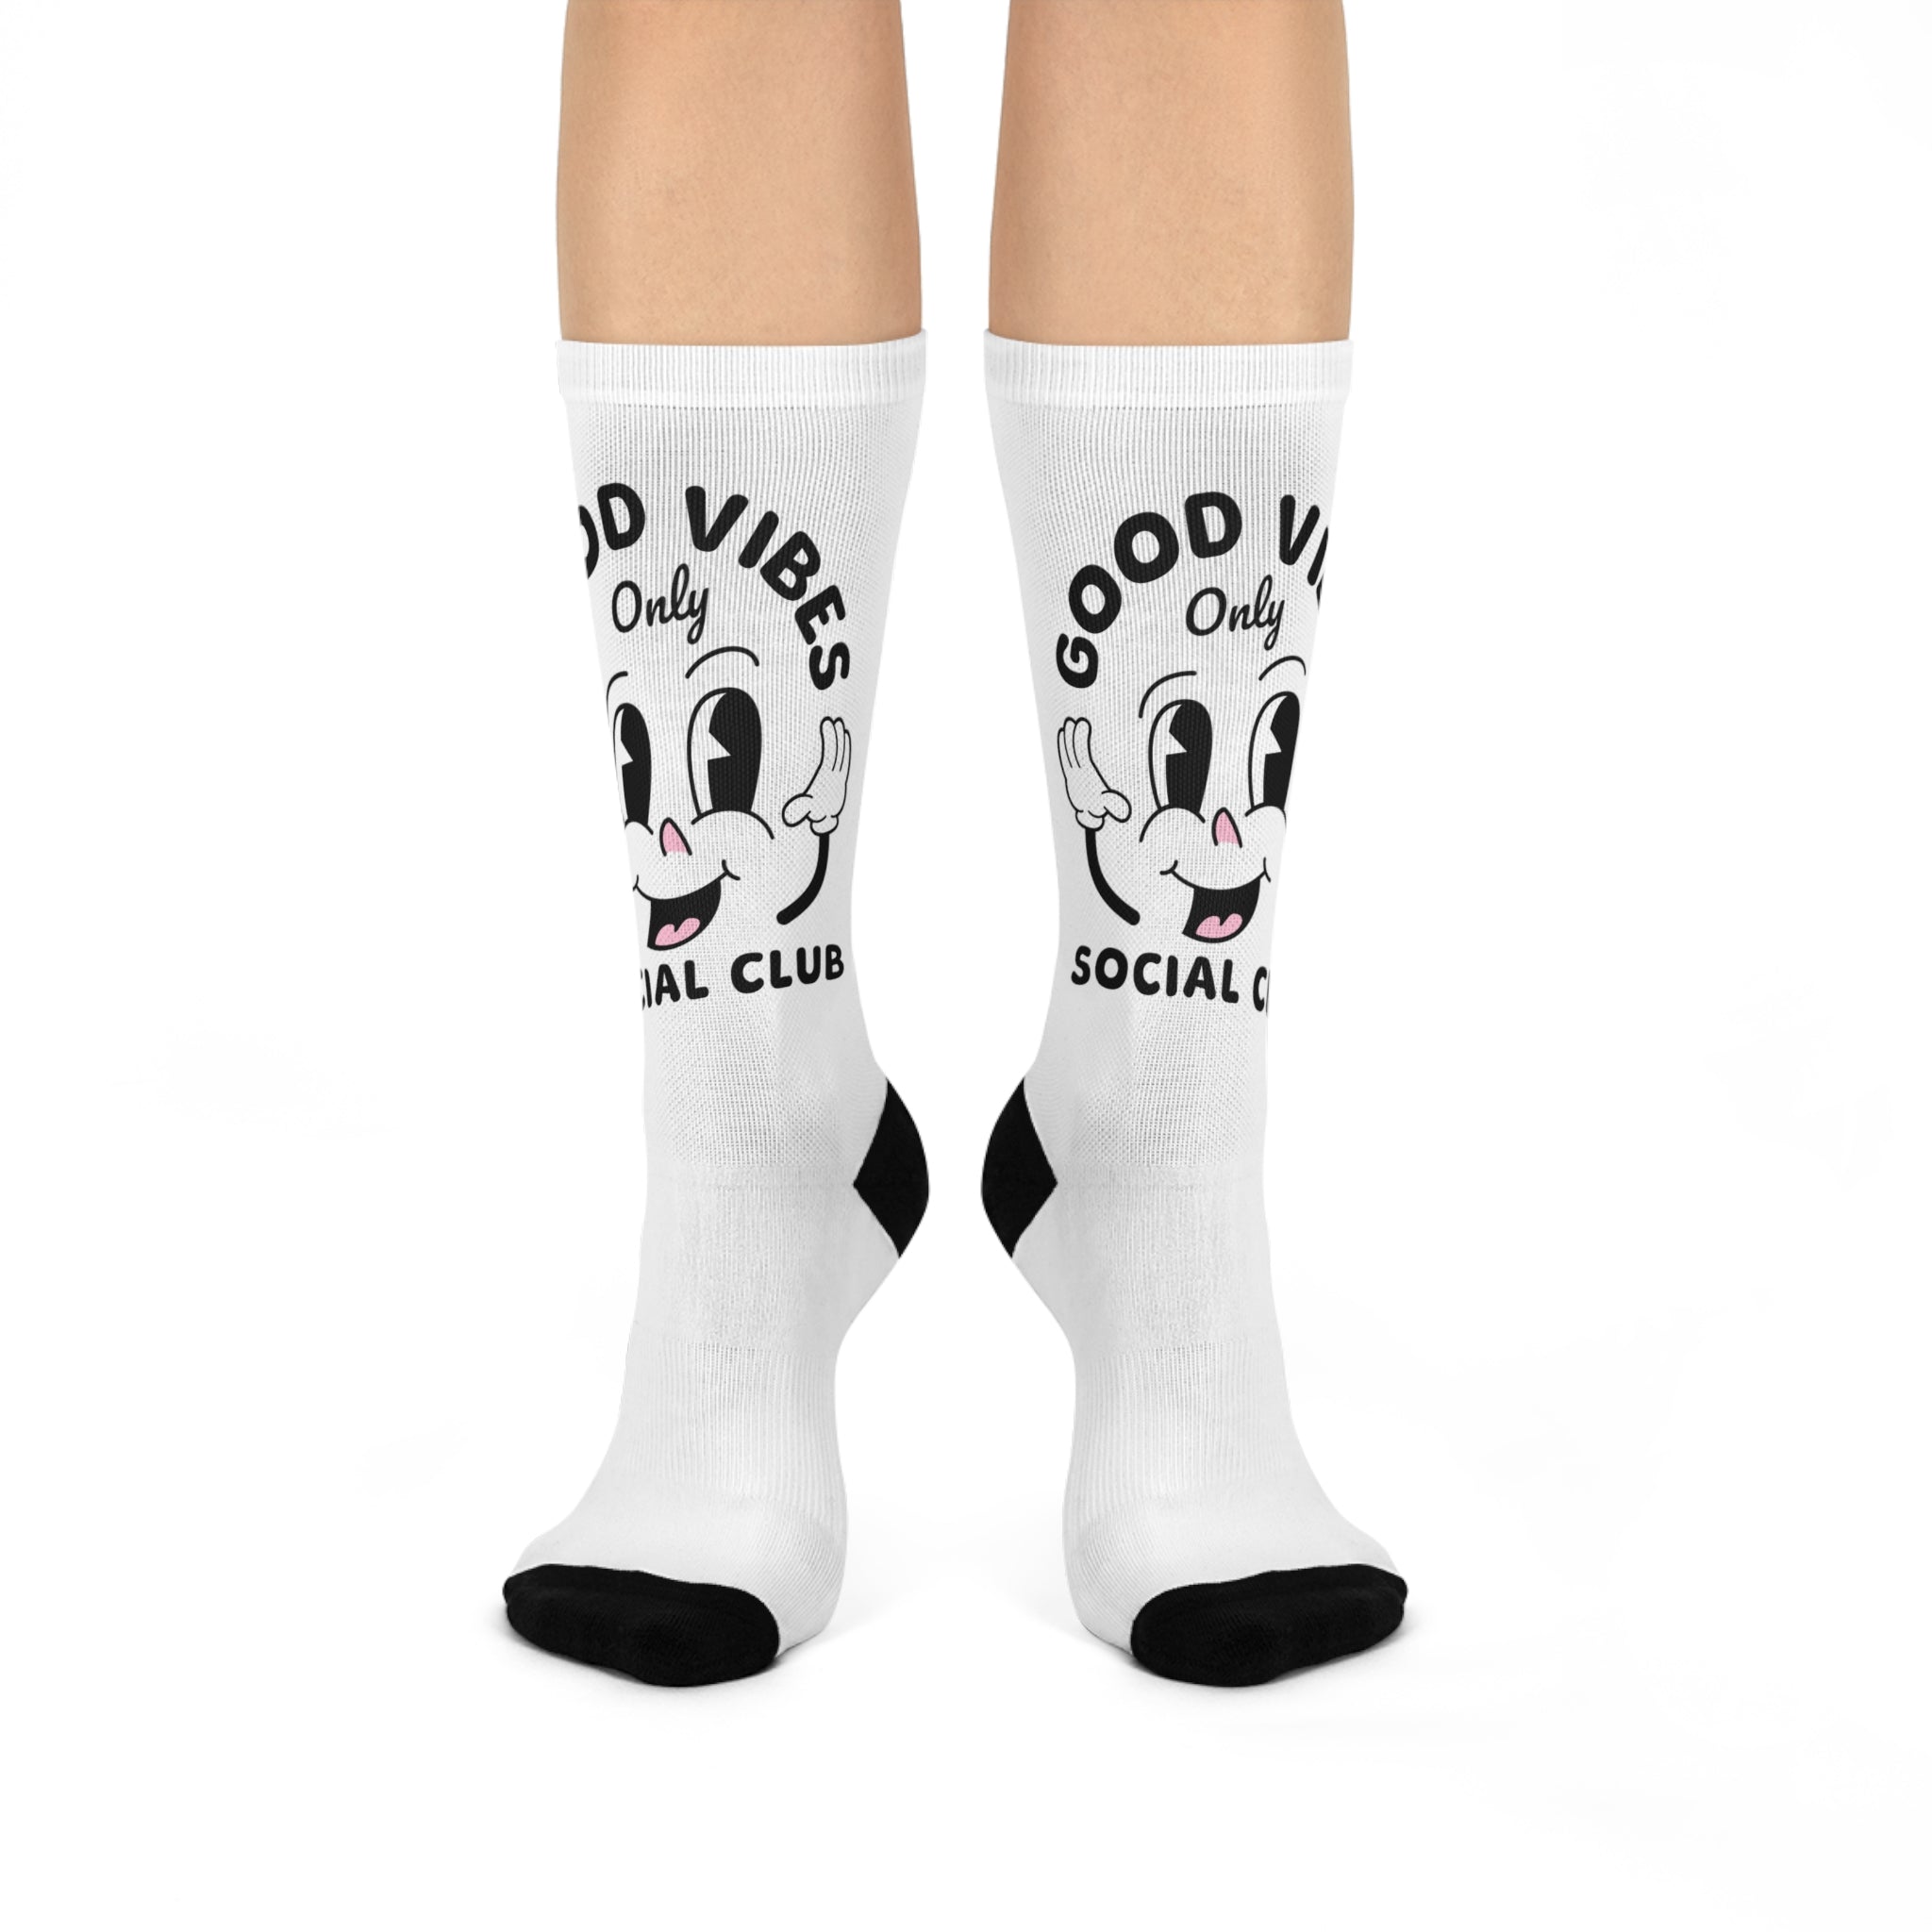 Good Vibes Only Cushioned Crew Socks